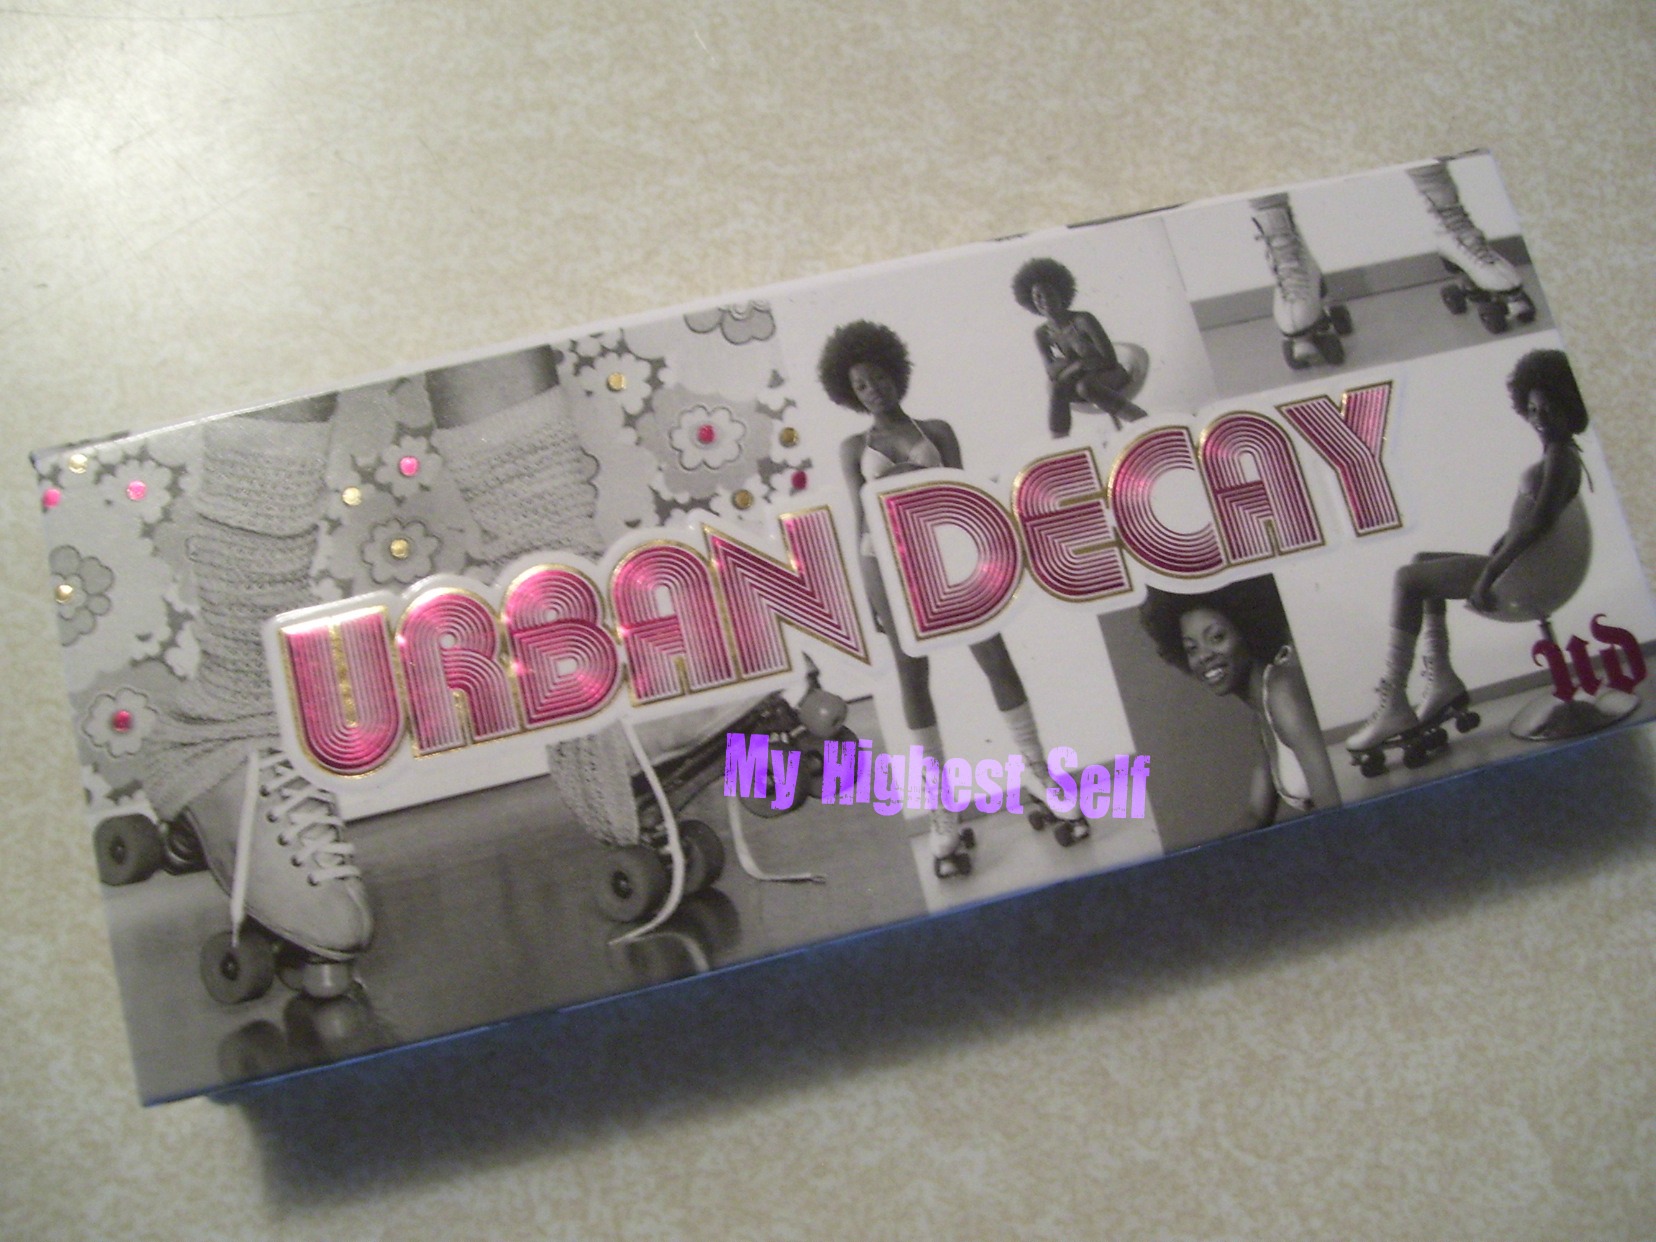 Photos, Swatches, Review: Urban Decay Rollergirl Palette